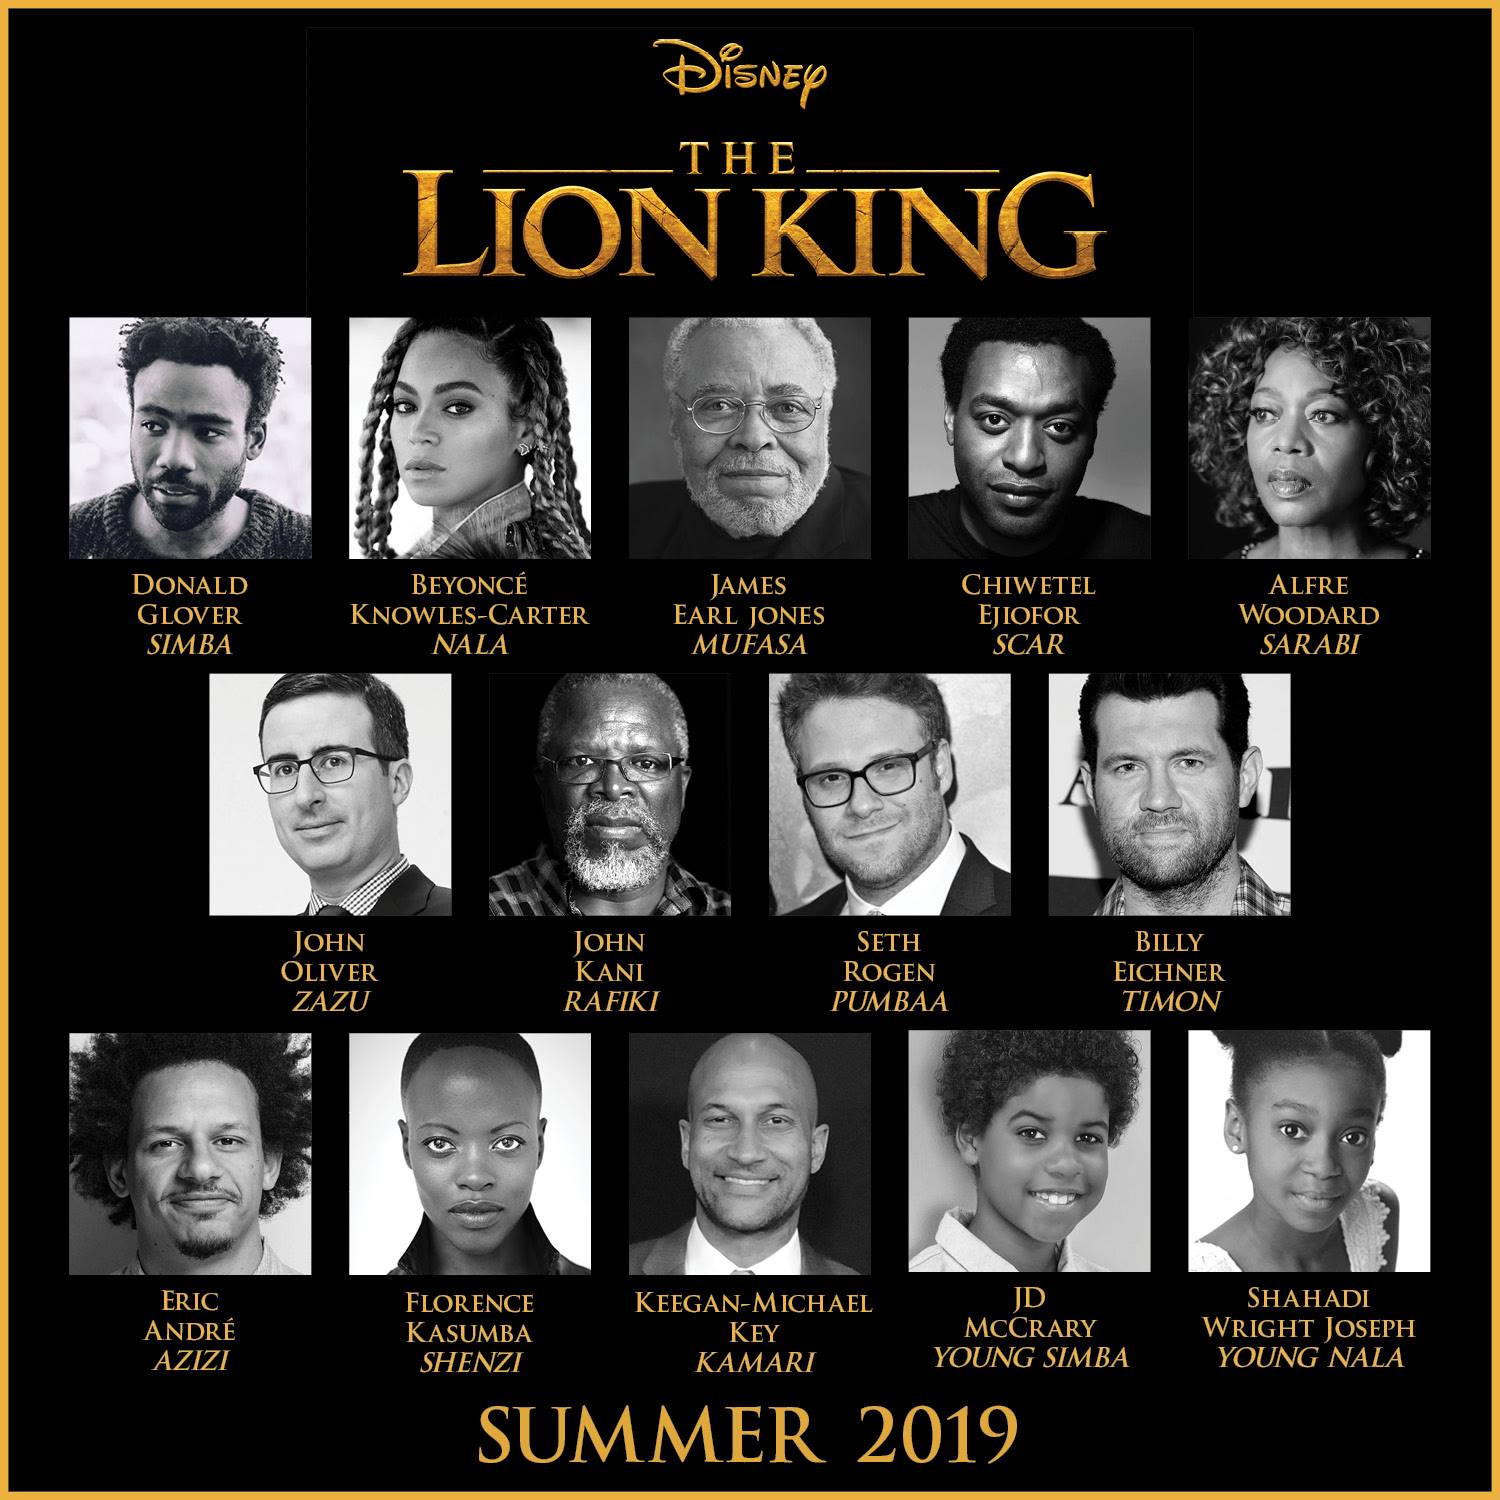 Cast Announced for Disney’s Big-Screen Retelling of The Lion King